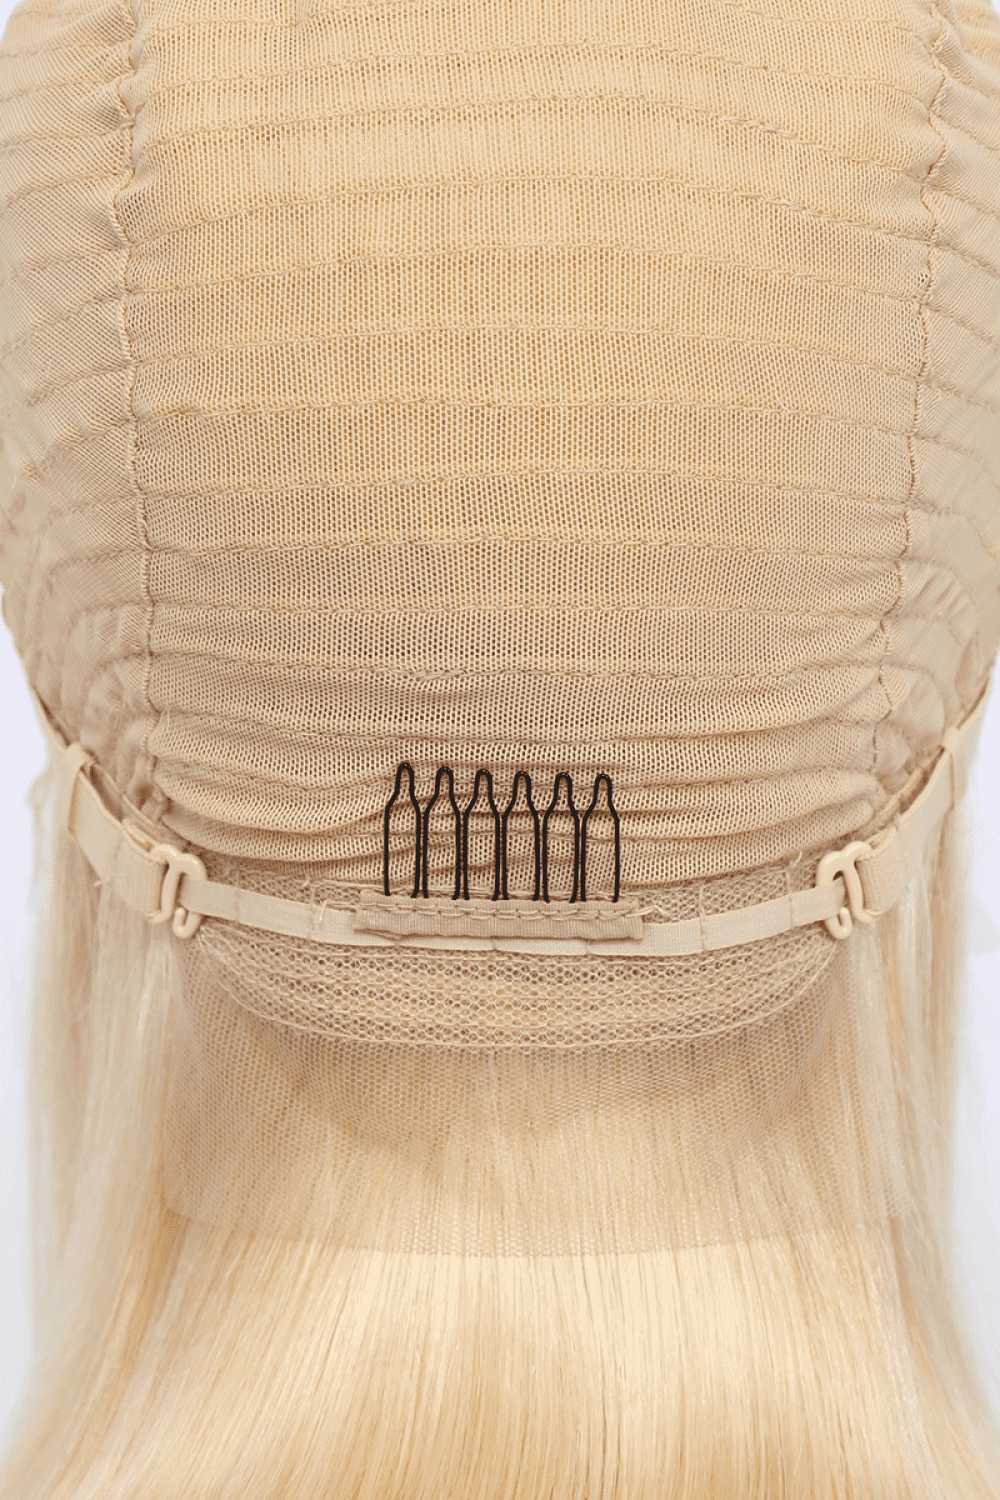 a close up of a hair piece with hair pins on it